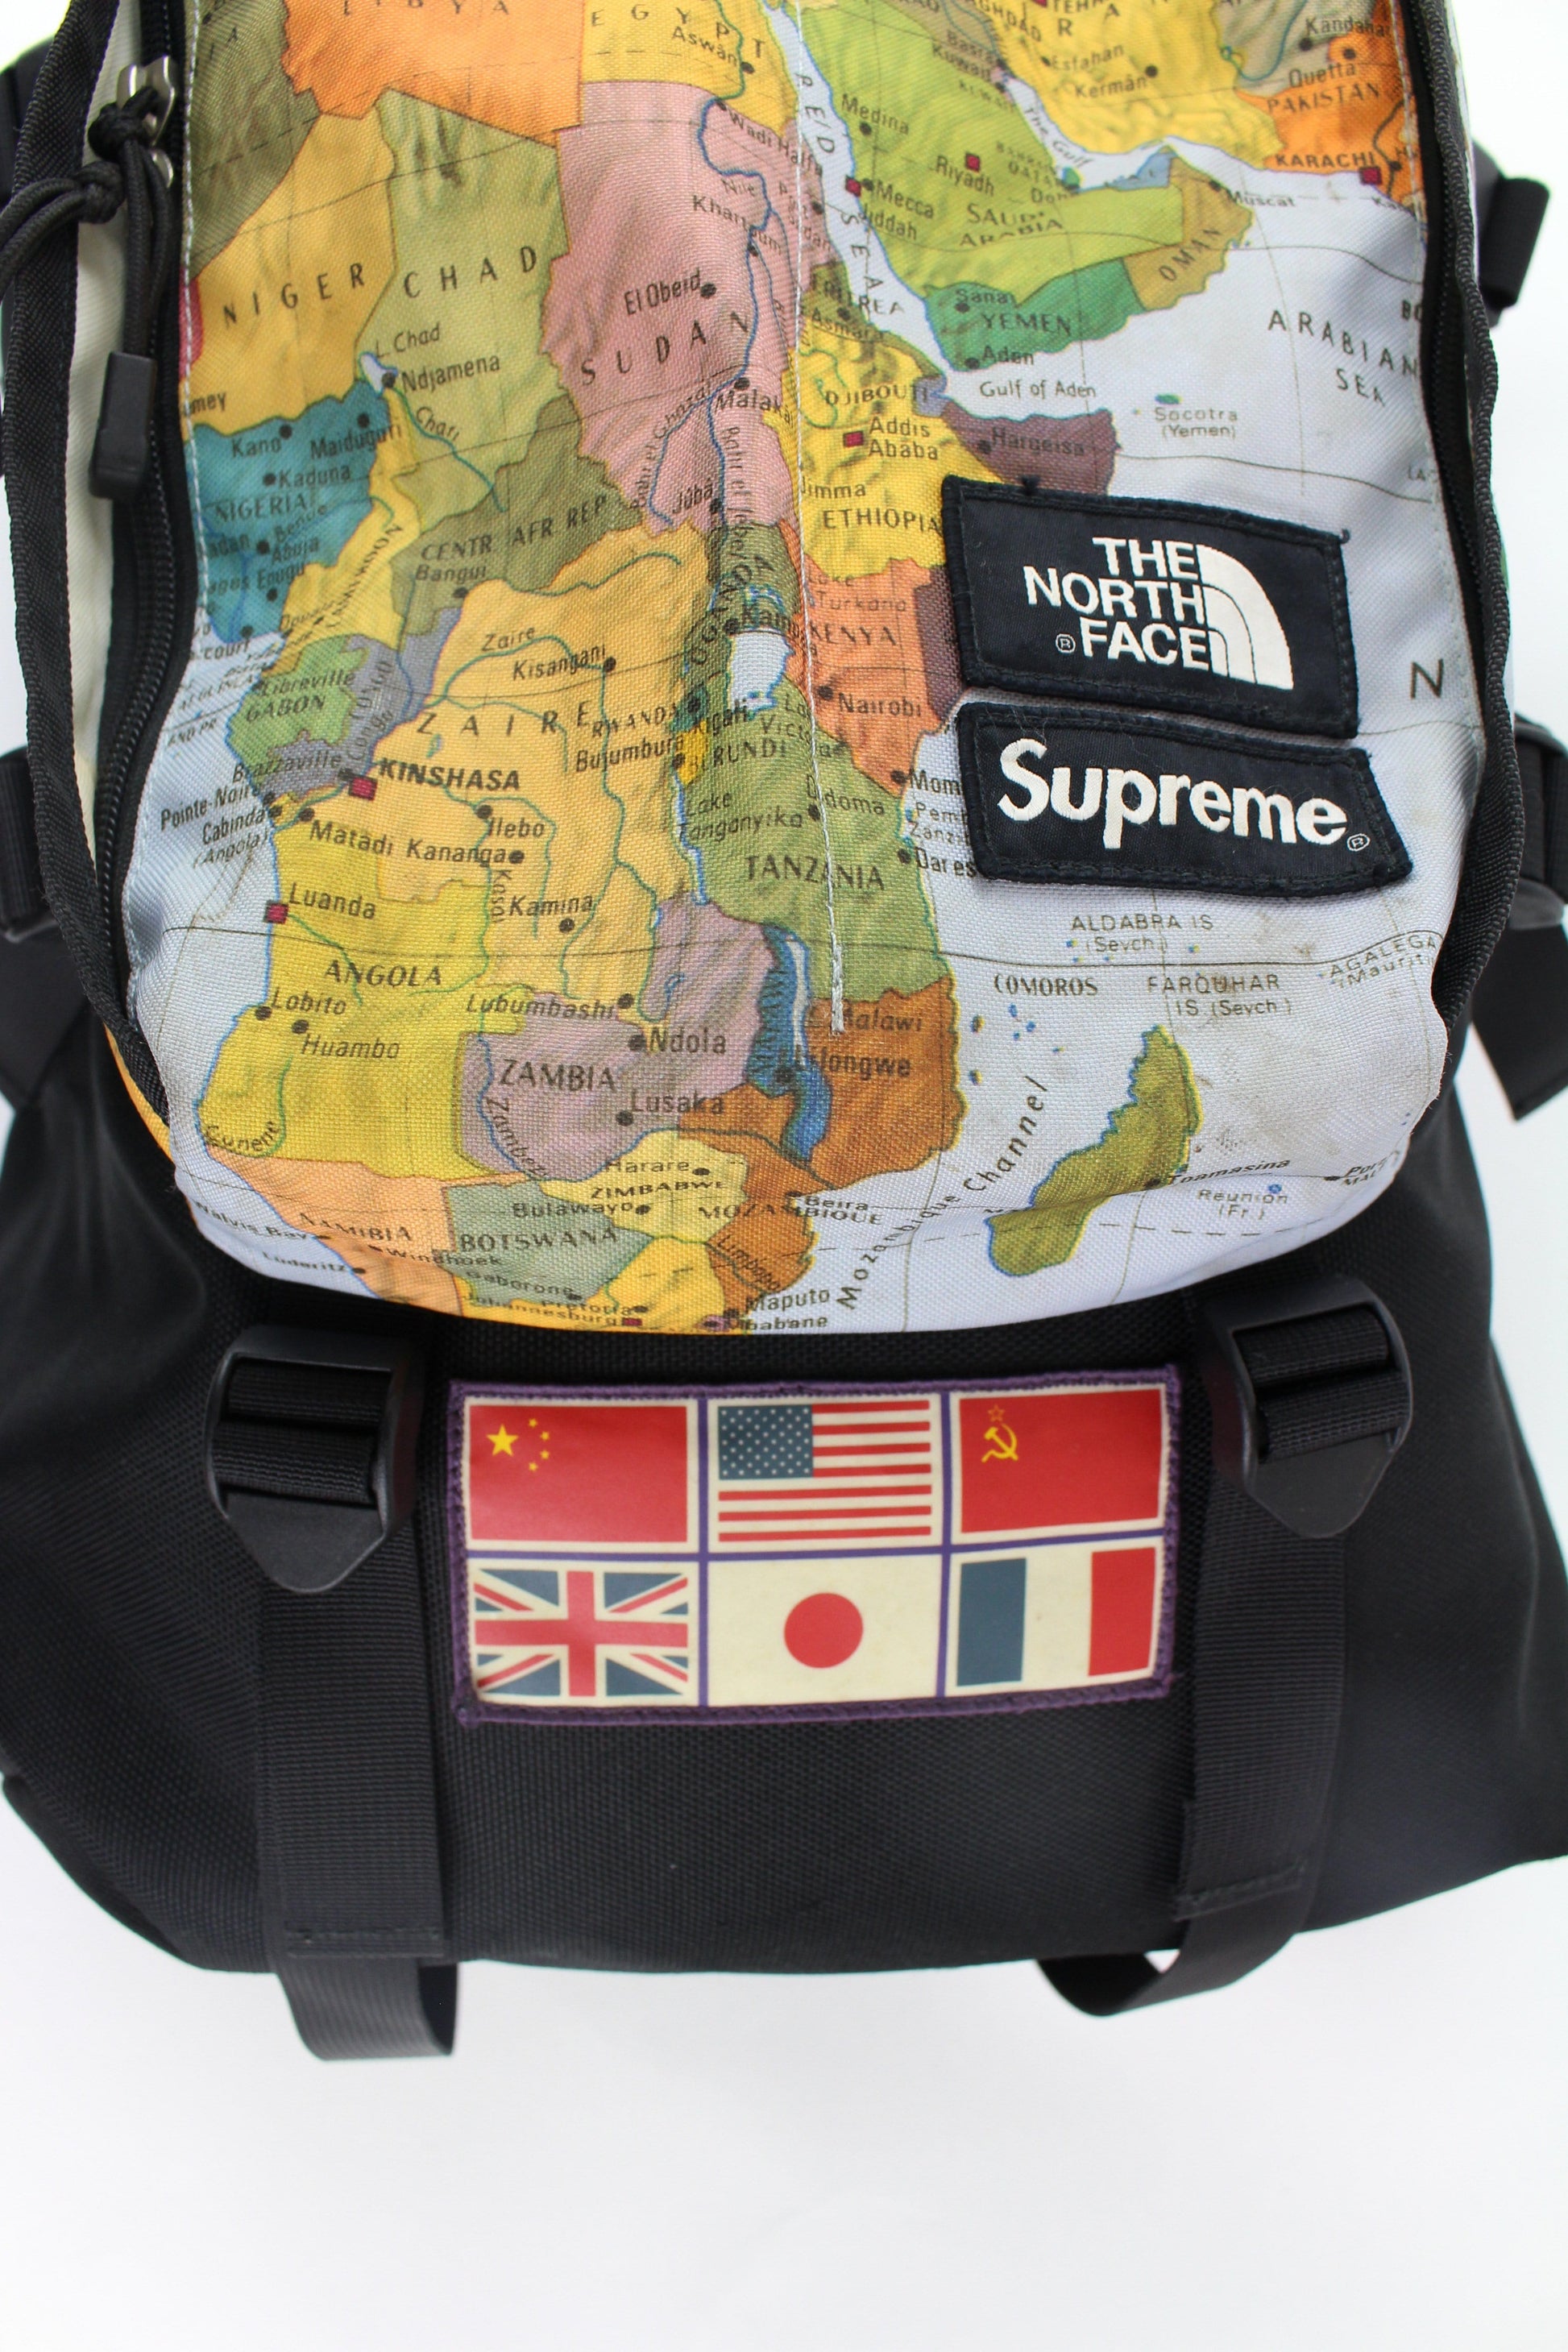 supreme x the north face maps expedition backpack - SaruGeneral